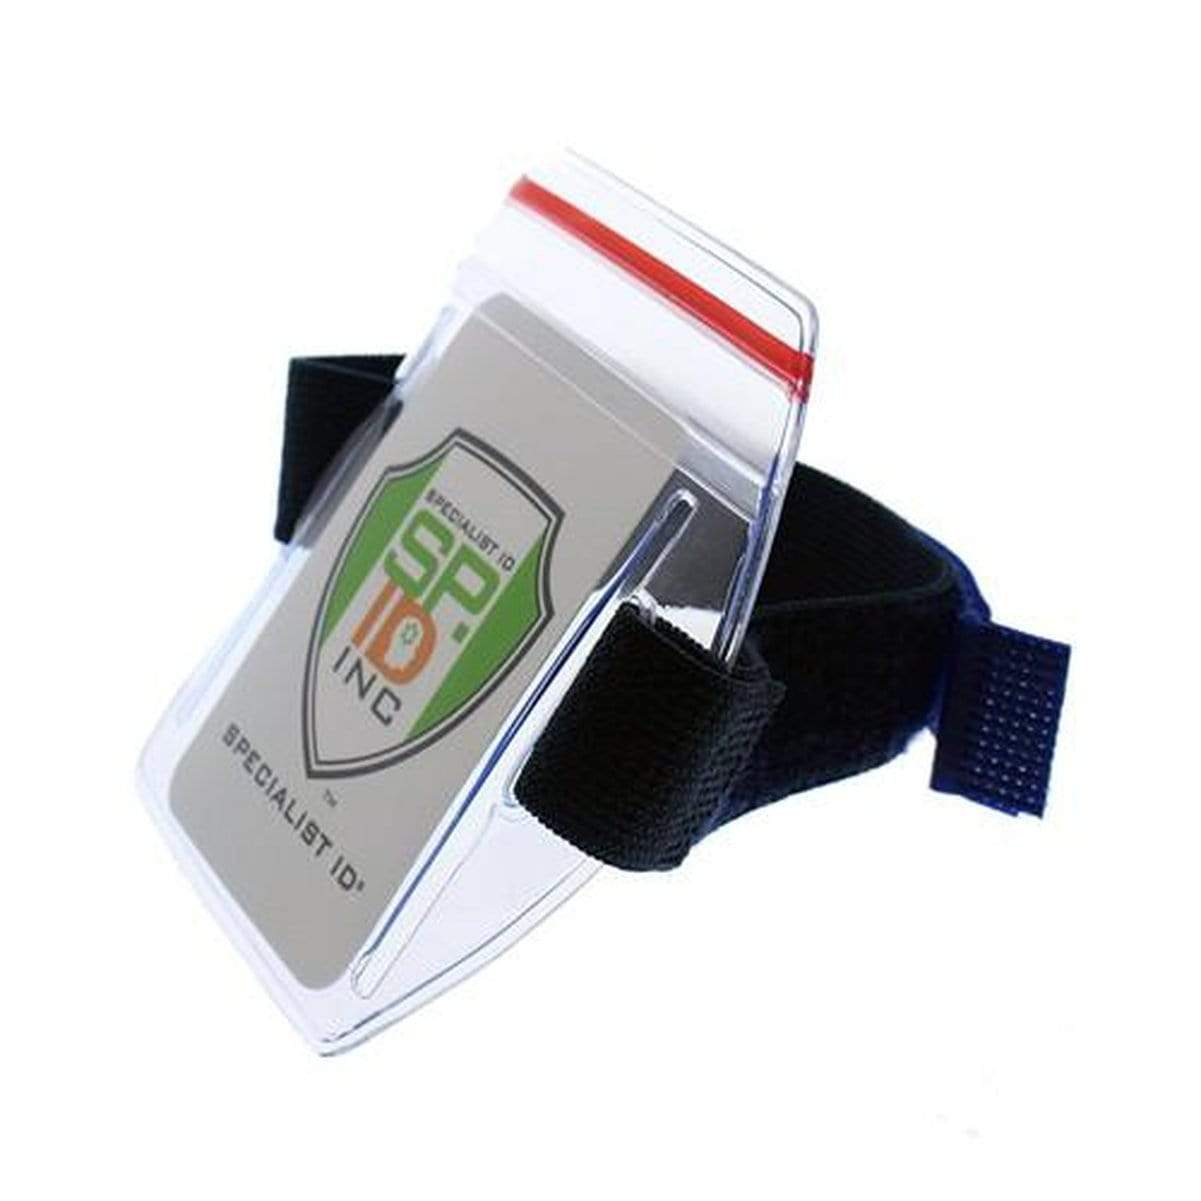 Vertical Arm Badge Holder with Elastic Band and Zip Lock Seal (ABH-V-BLU-ZIP)